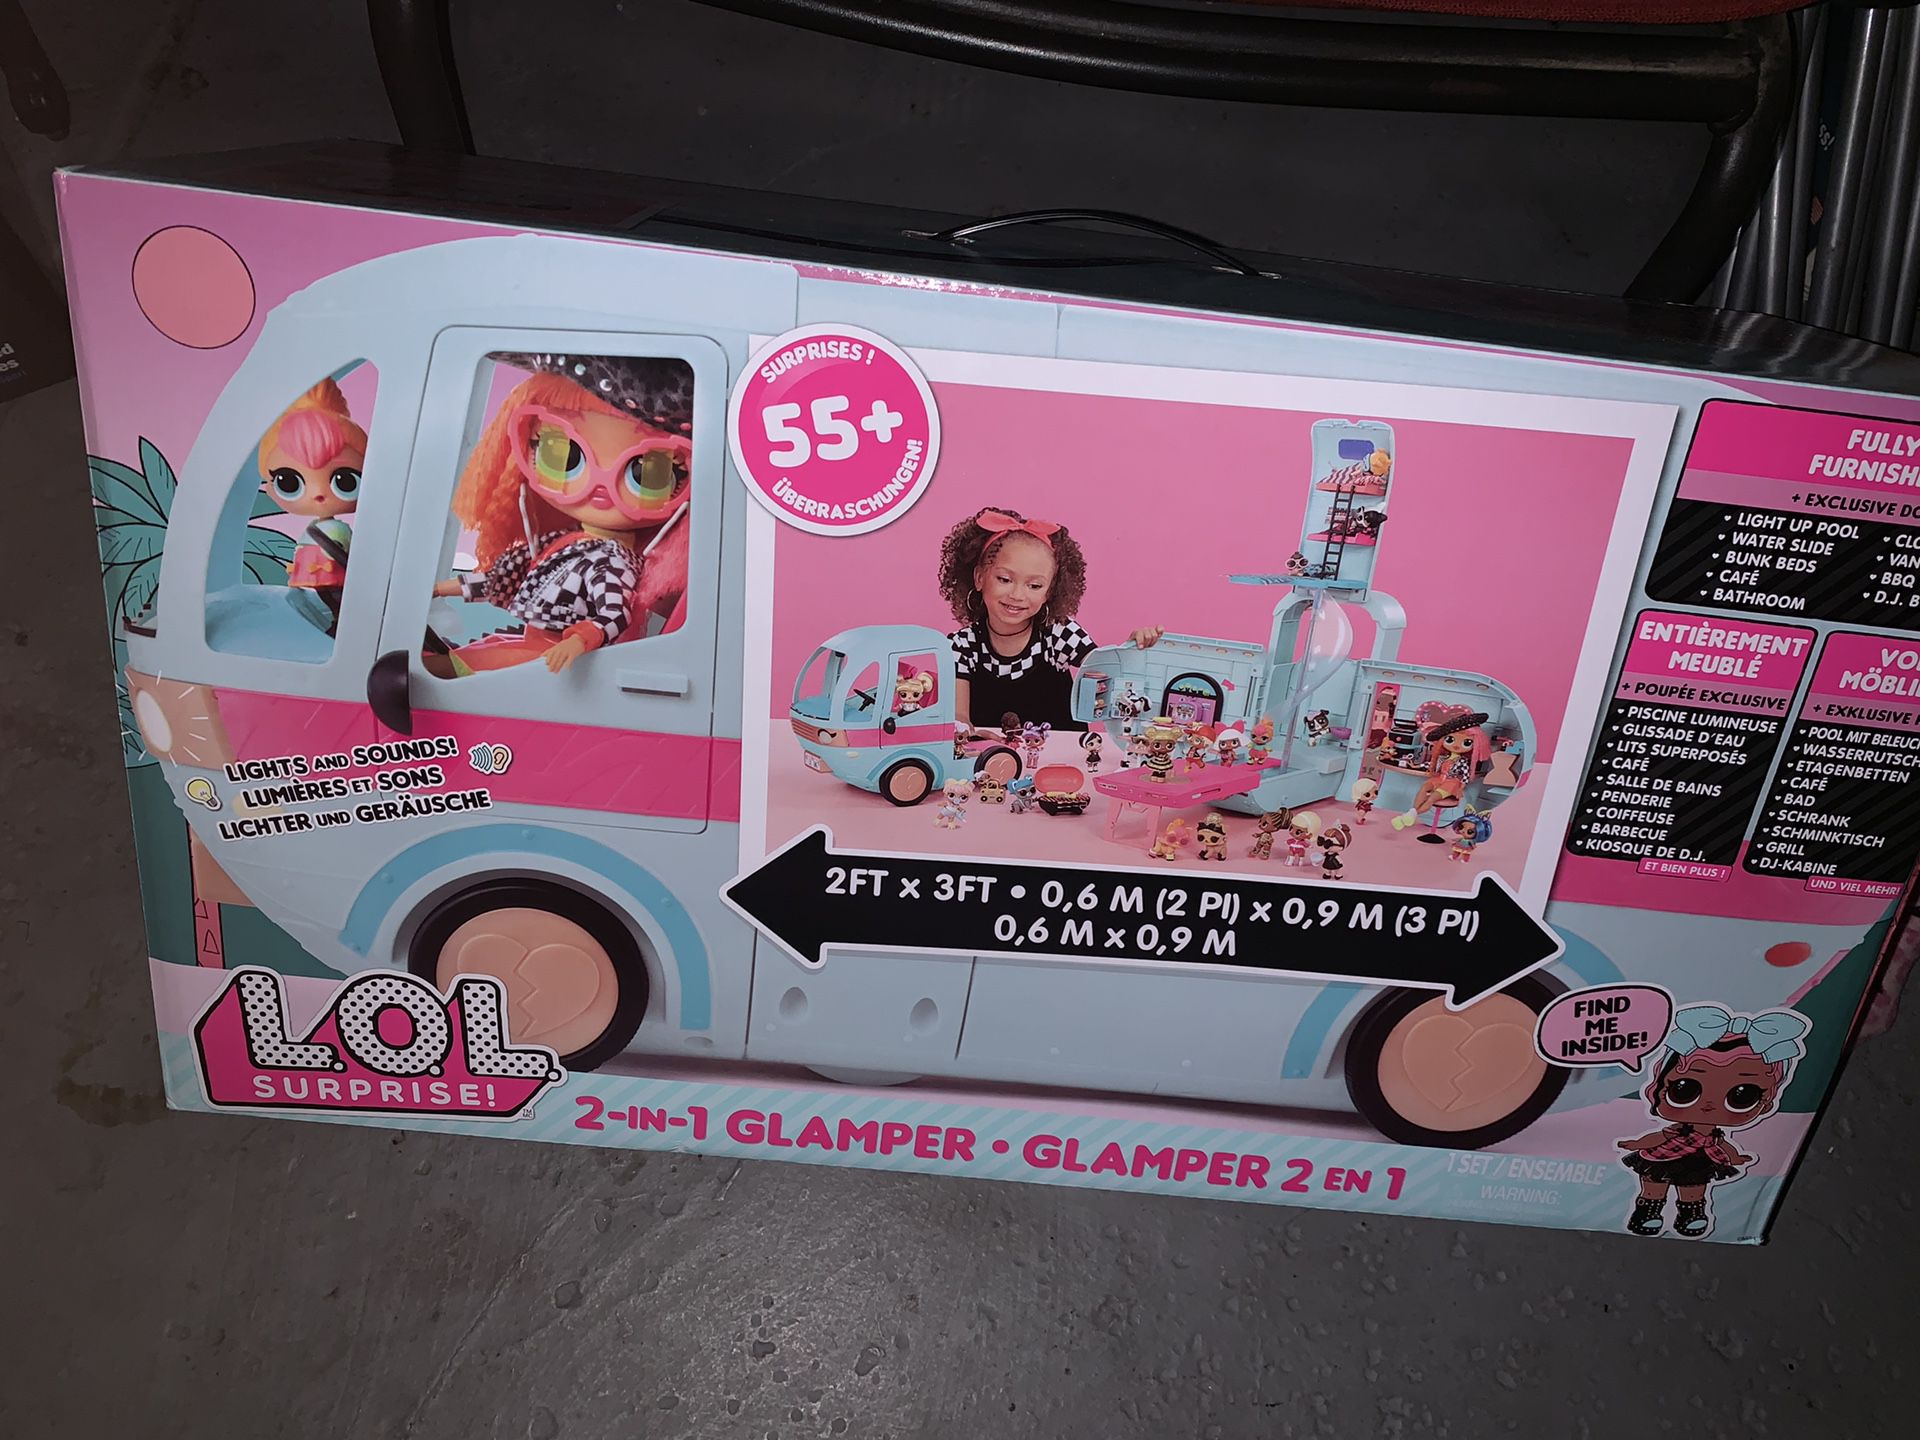 LoL Surprise Bus ! Never opened 2-in-1 Glamper Fashion Camper with 55+